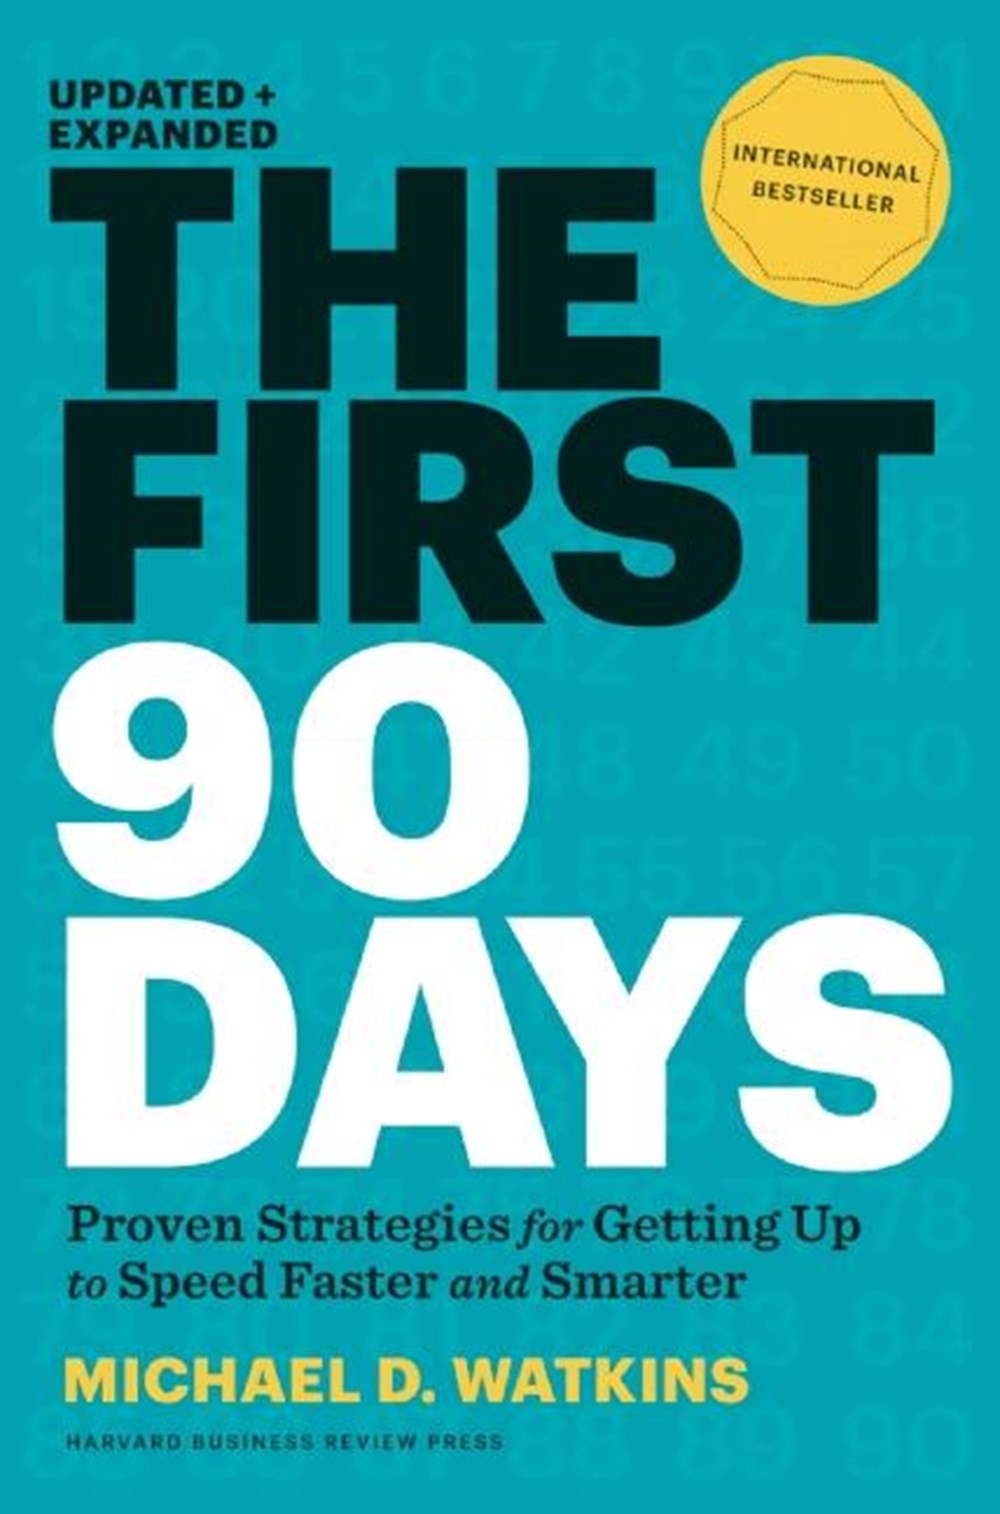 First 90 Days, Updated and Expanded Proven Strategies for Getting Up to Speed Faster and Smarter